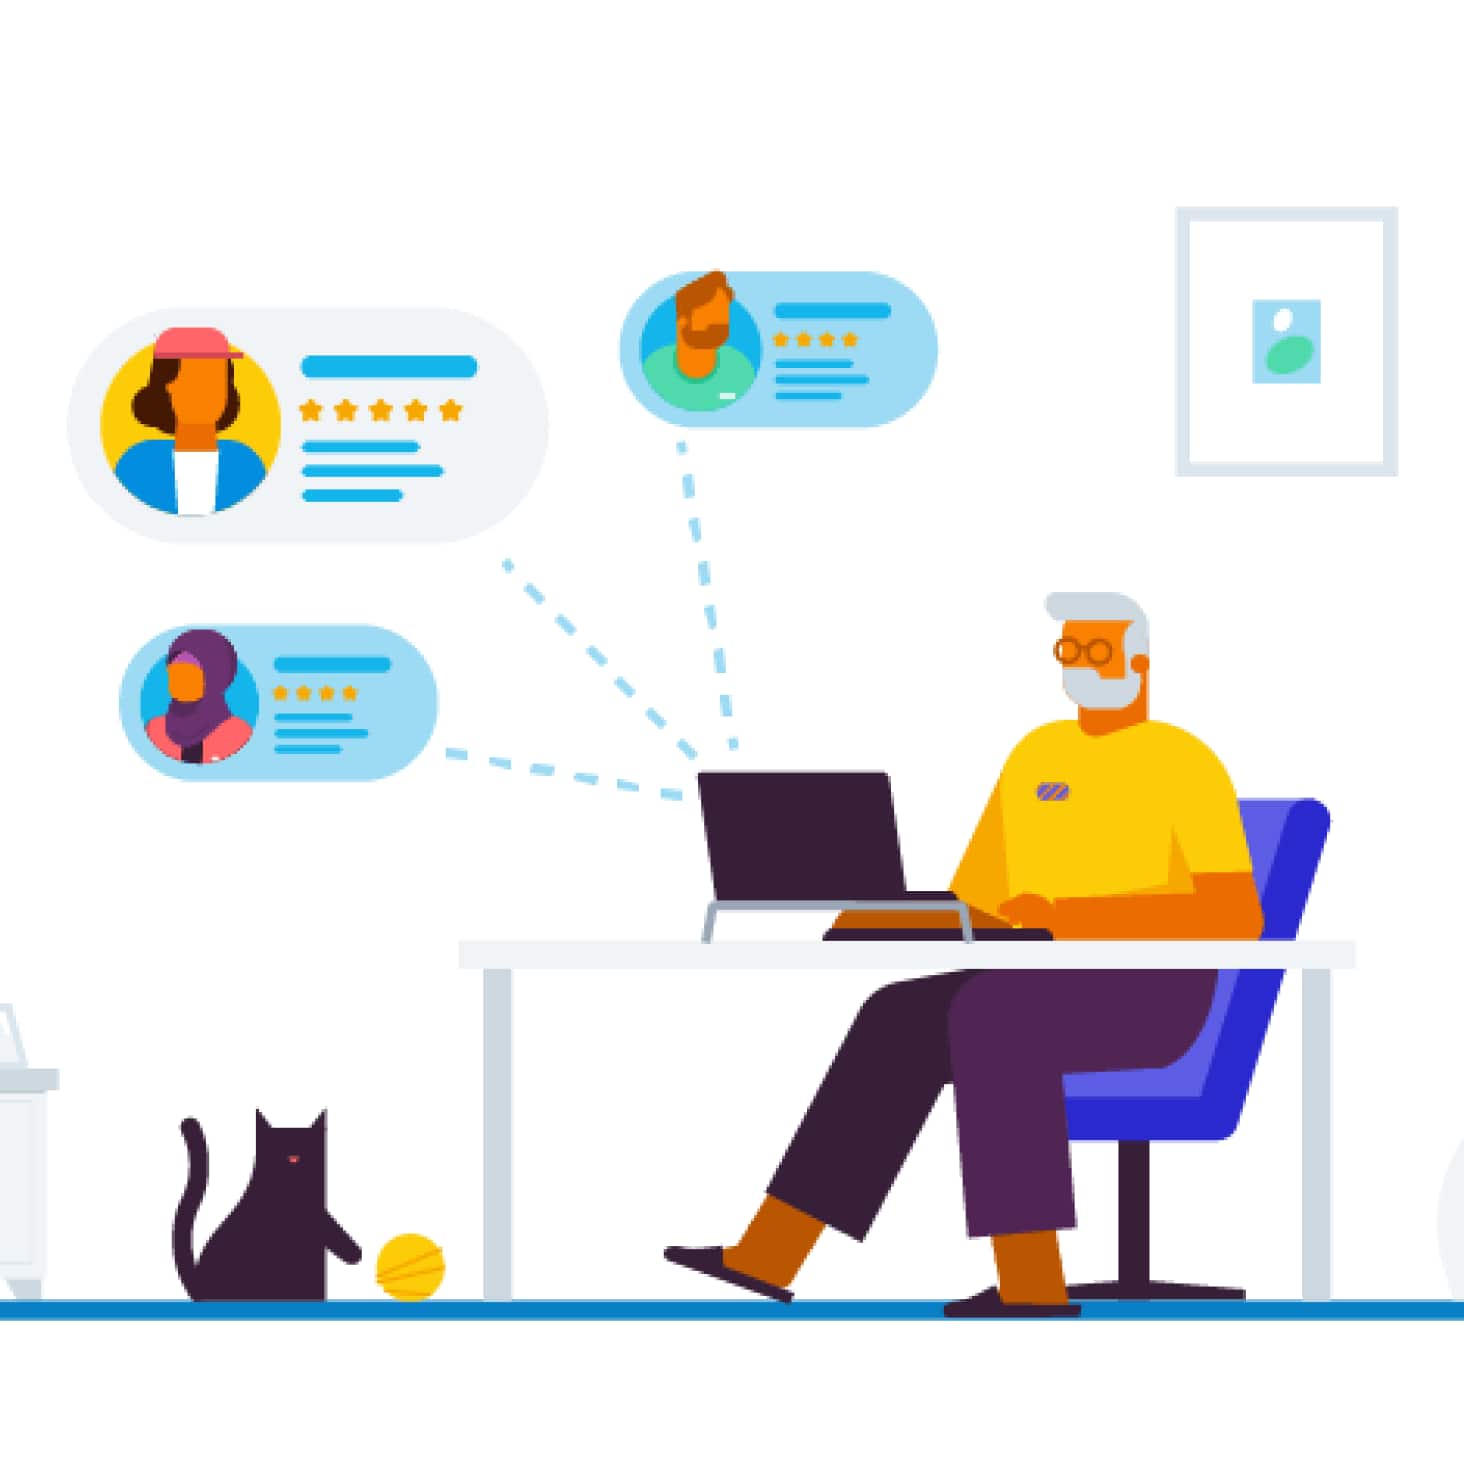 A business owner updates Xero on their notebook computer, seated at a desk, while a cat plays with a ball on the floor. 